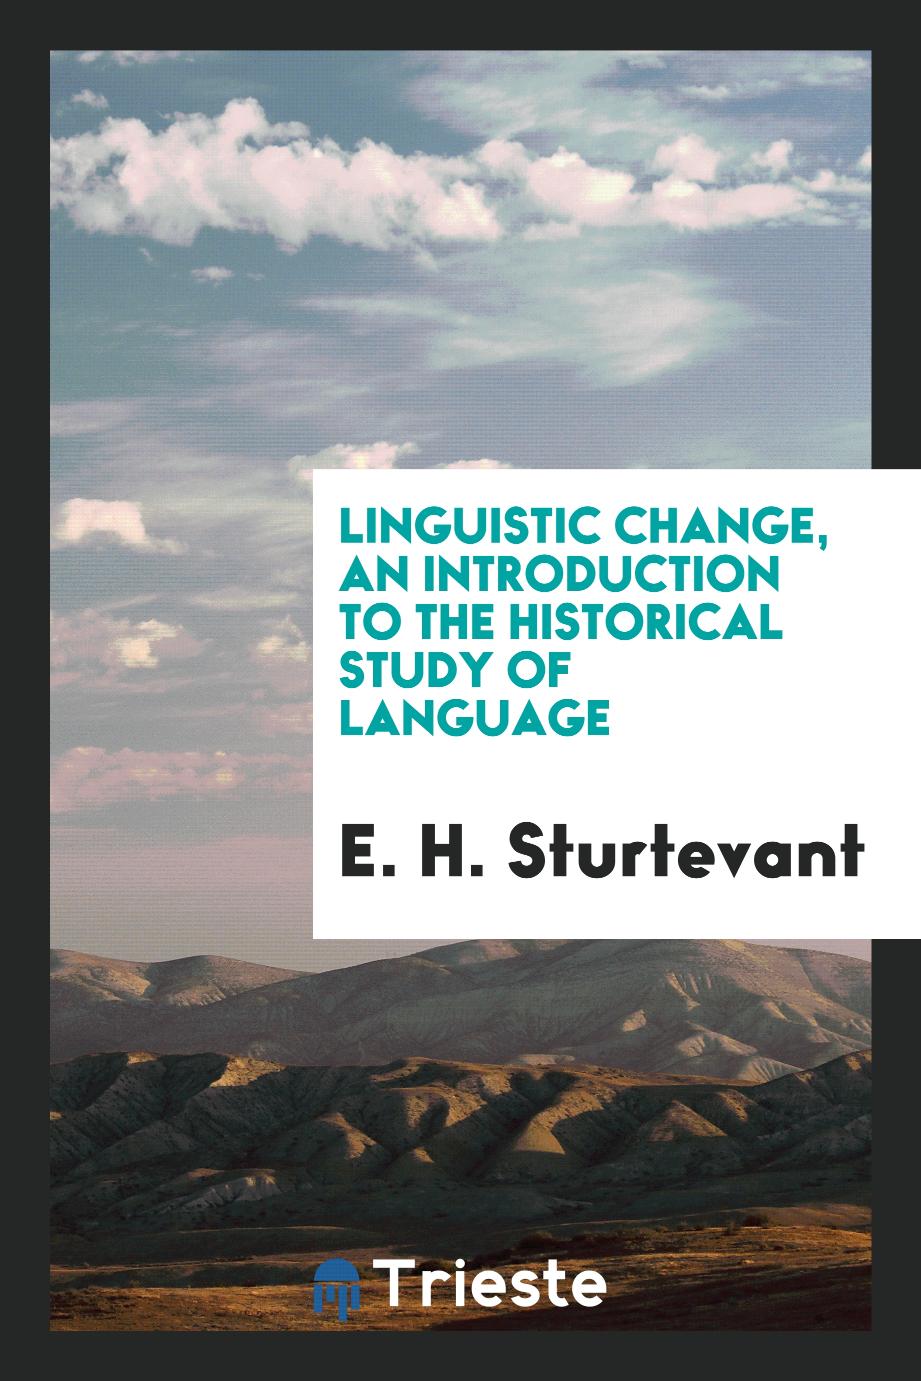 Linguistic change, an introduction to the historical study of language